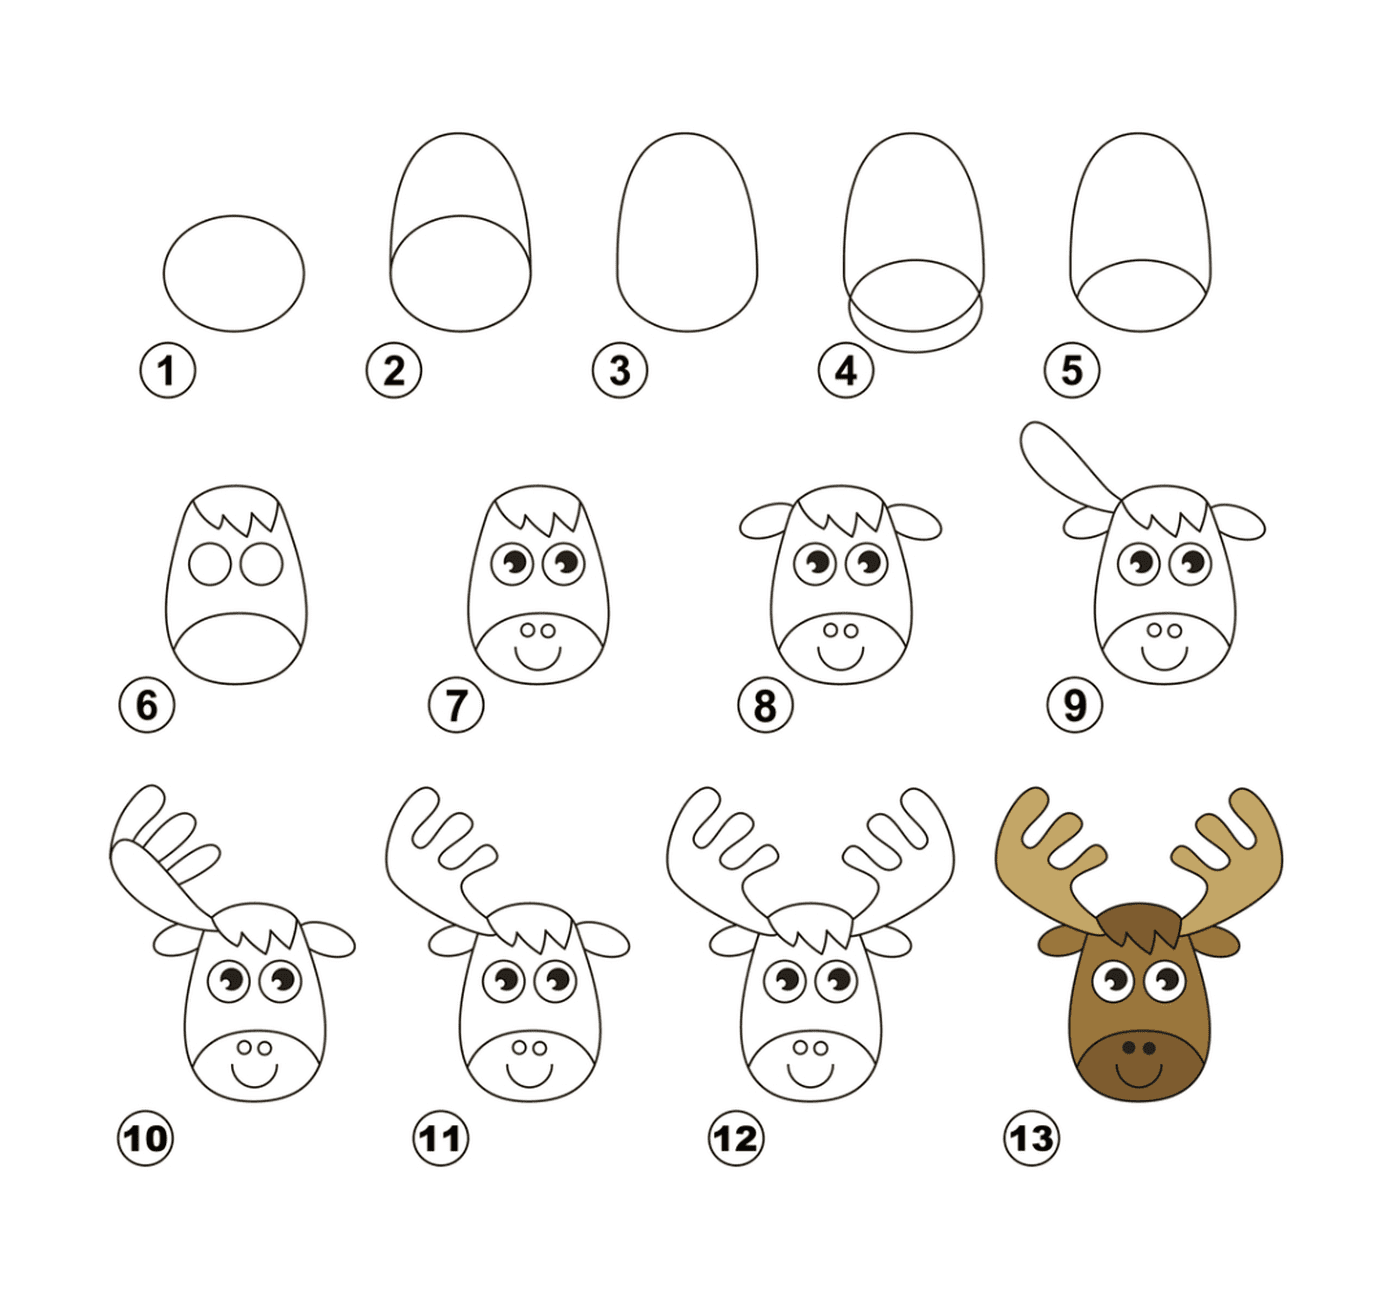  Step by step instructions on how to draw an easy reindeer 